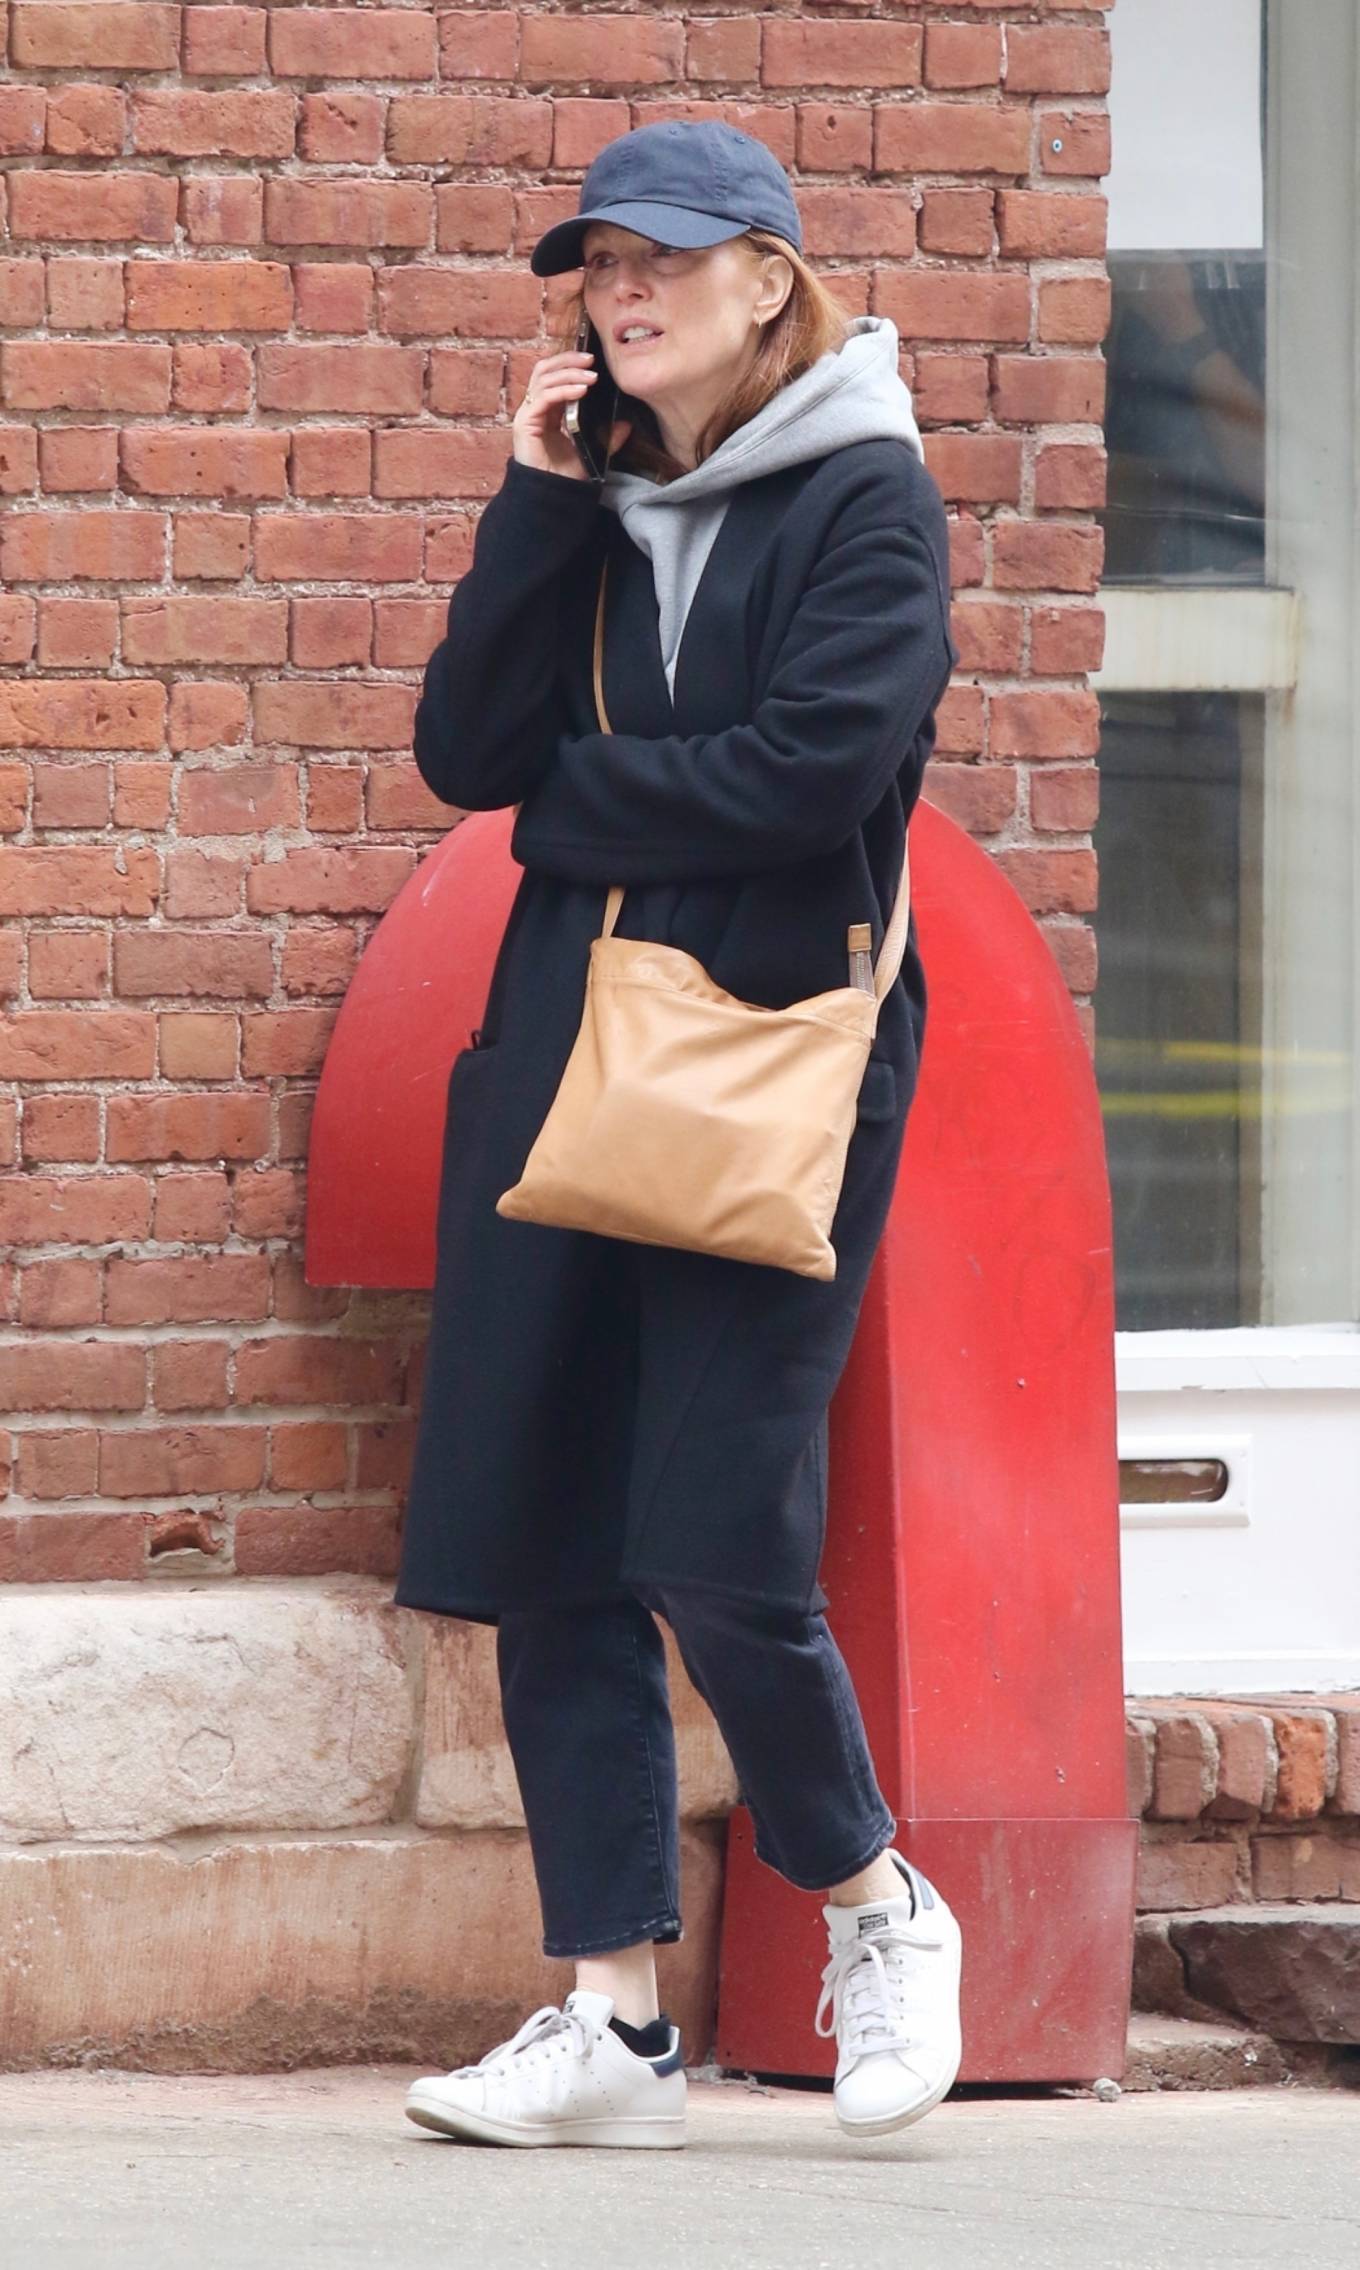 Julianne Moore - On the phone while out in Manhattan’s West Village Neighborhood